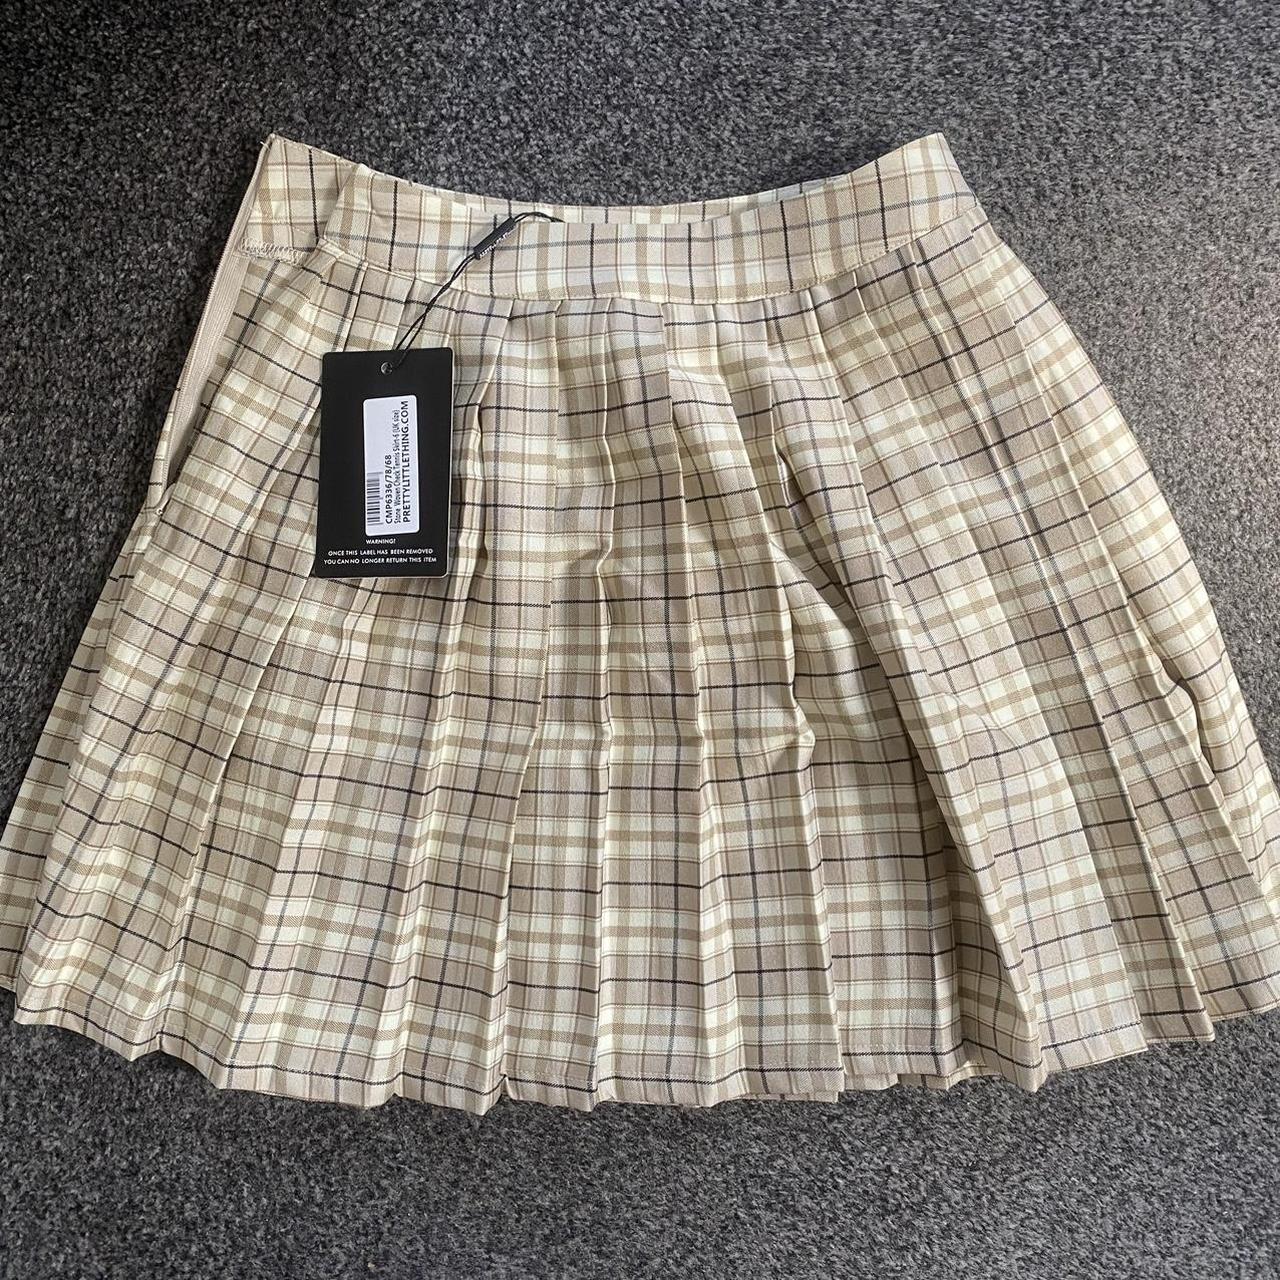 Stone woven checkered pleated mini skirt from pretty... - Depop